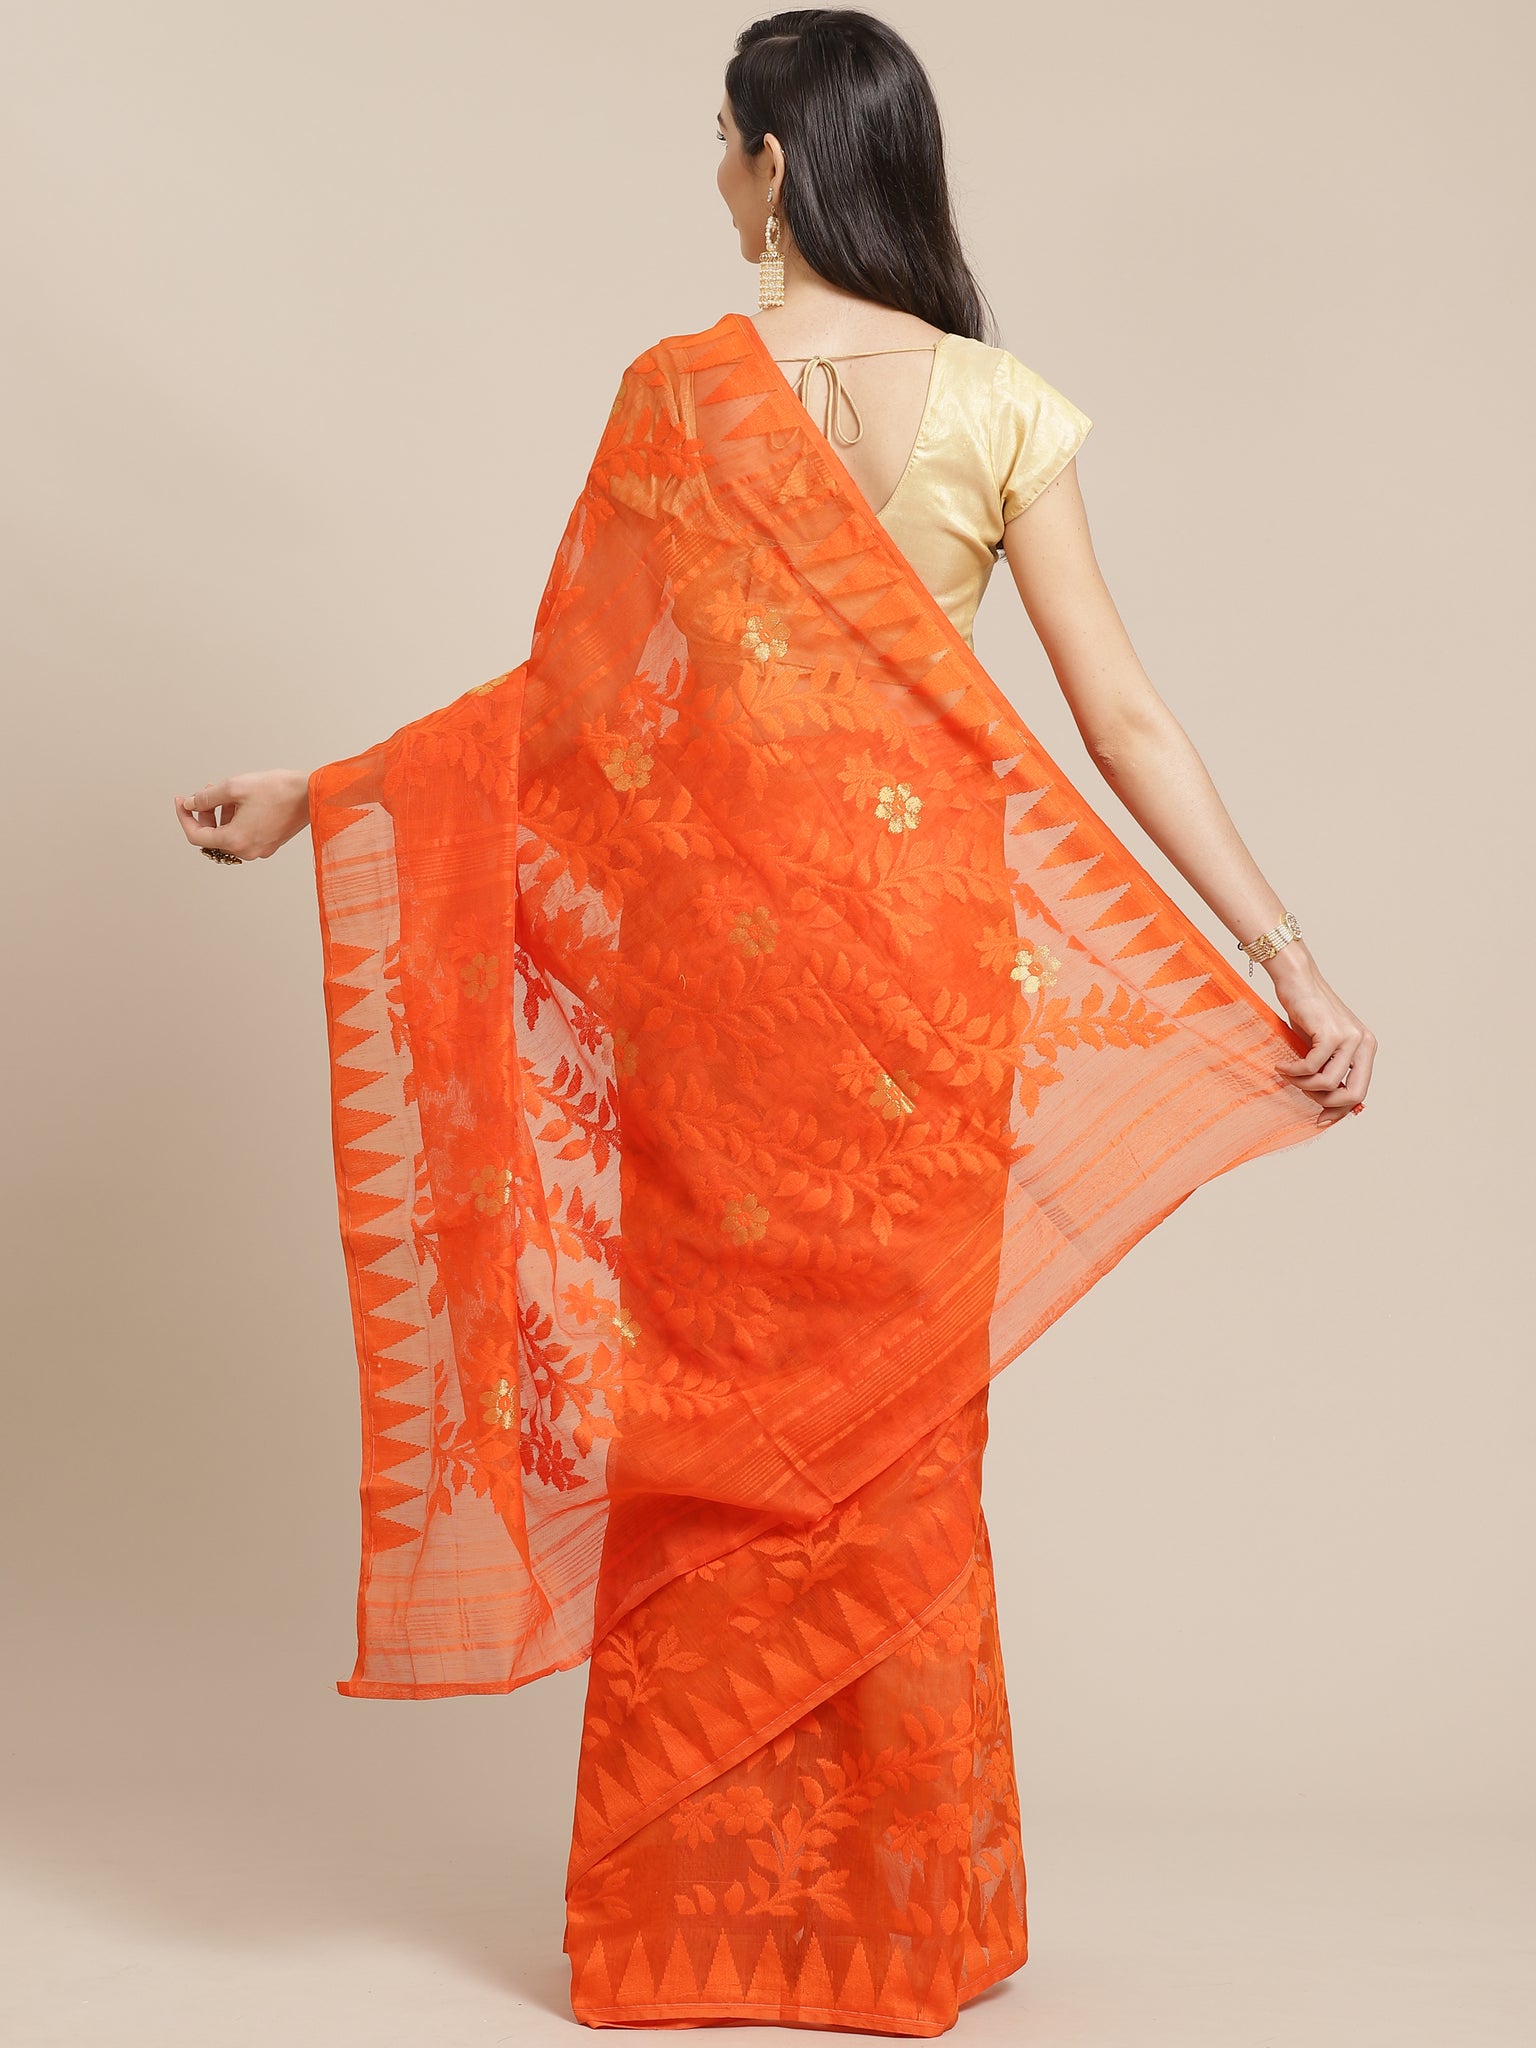 Orange and Tan, Kalakari India Jamdani Silk Cotton Woven Design Saree without blouse CHBHSA0019-Saree-Kalakari India-CHBHSA0019-Bengal, Geographical Indication, Hand Crafted, Hand Painted, Heritage Prints, Jamdani, Natural Dyes, Red, Sarees, Silk Blended, Sustainable Fabrics, Woven, Yellow-[Linen,Ethnic,wear,Fashionista,Handloom,Handicraft,Indigo,blockprint,block,print,Cotton,Chanderi,Blue, latest,classy,party,bollywood,trendy,summer,style,traditional,formal,elegant,unique,style,hand,block,print